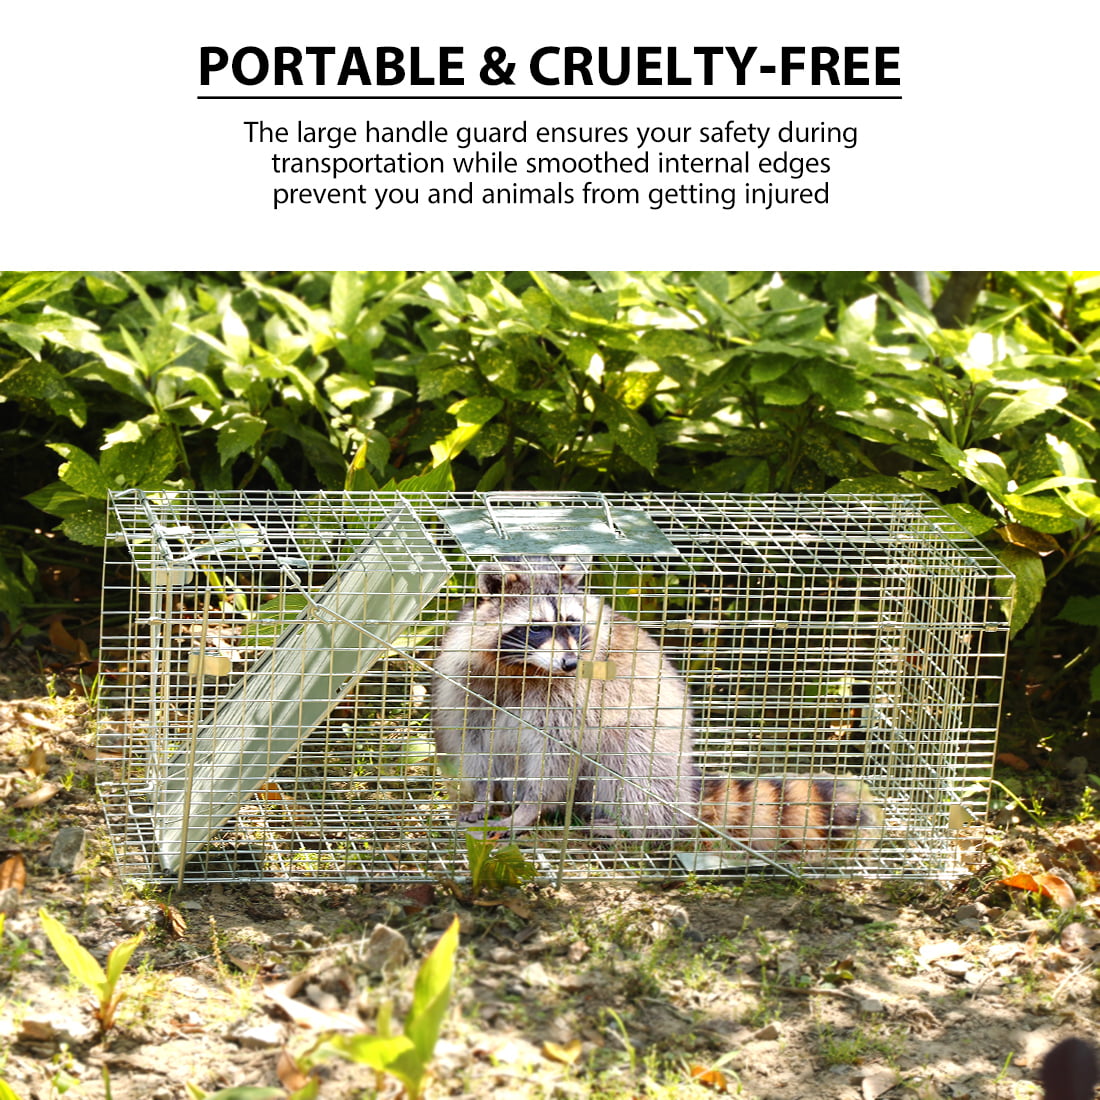 twocorn 17.3 Heavy Duty Live Squirrel Trap, Folding Small Animal Cage  Traps, Humane Cat Trap for Stray Cats, Rabbits, Raccoons, Skunks, Possums  and